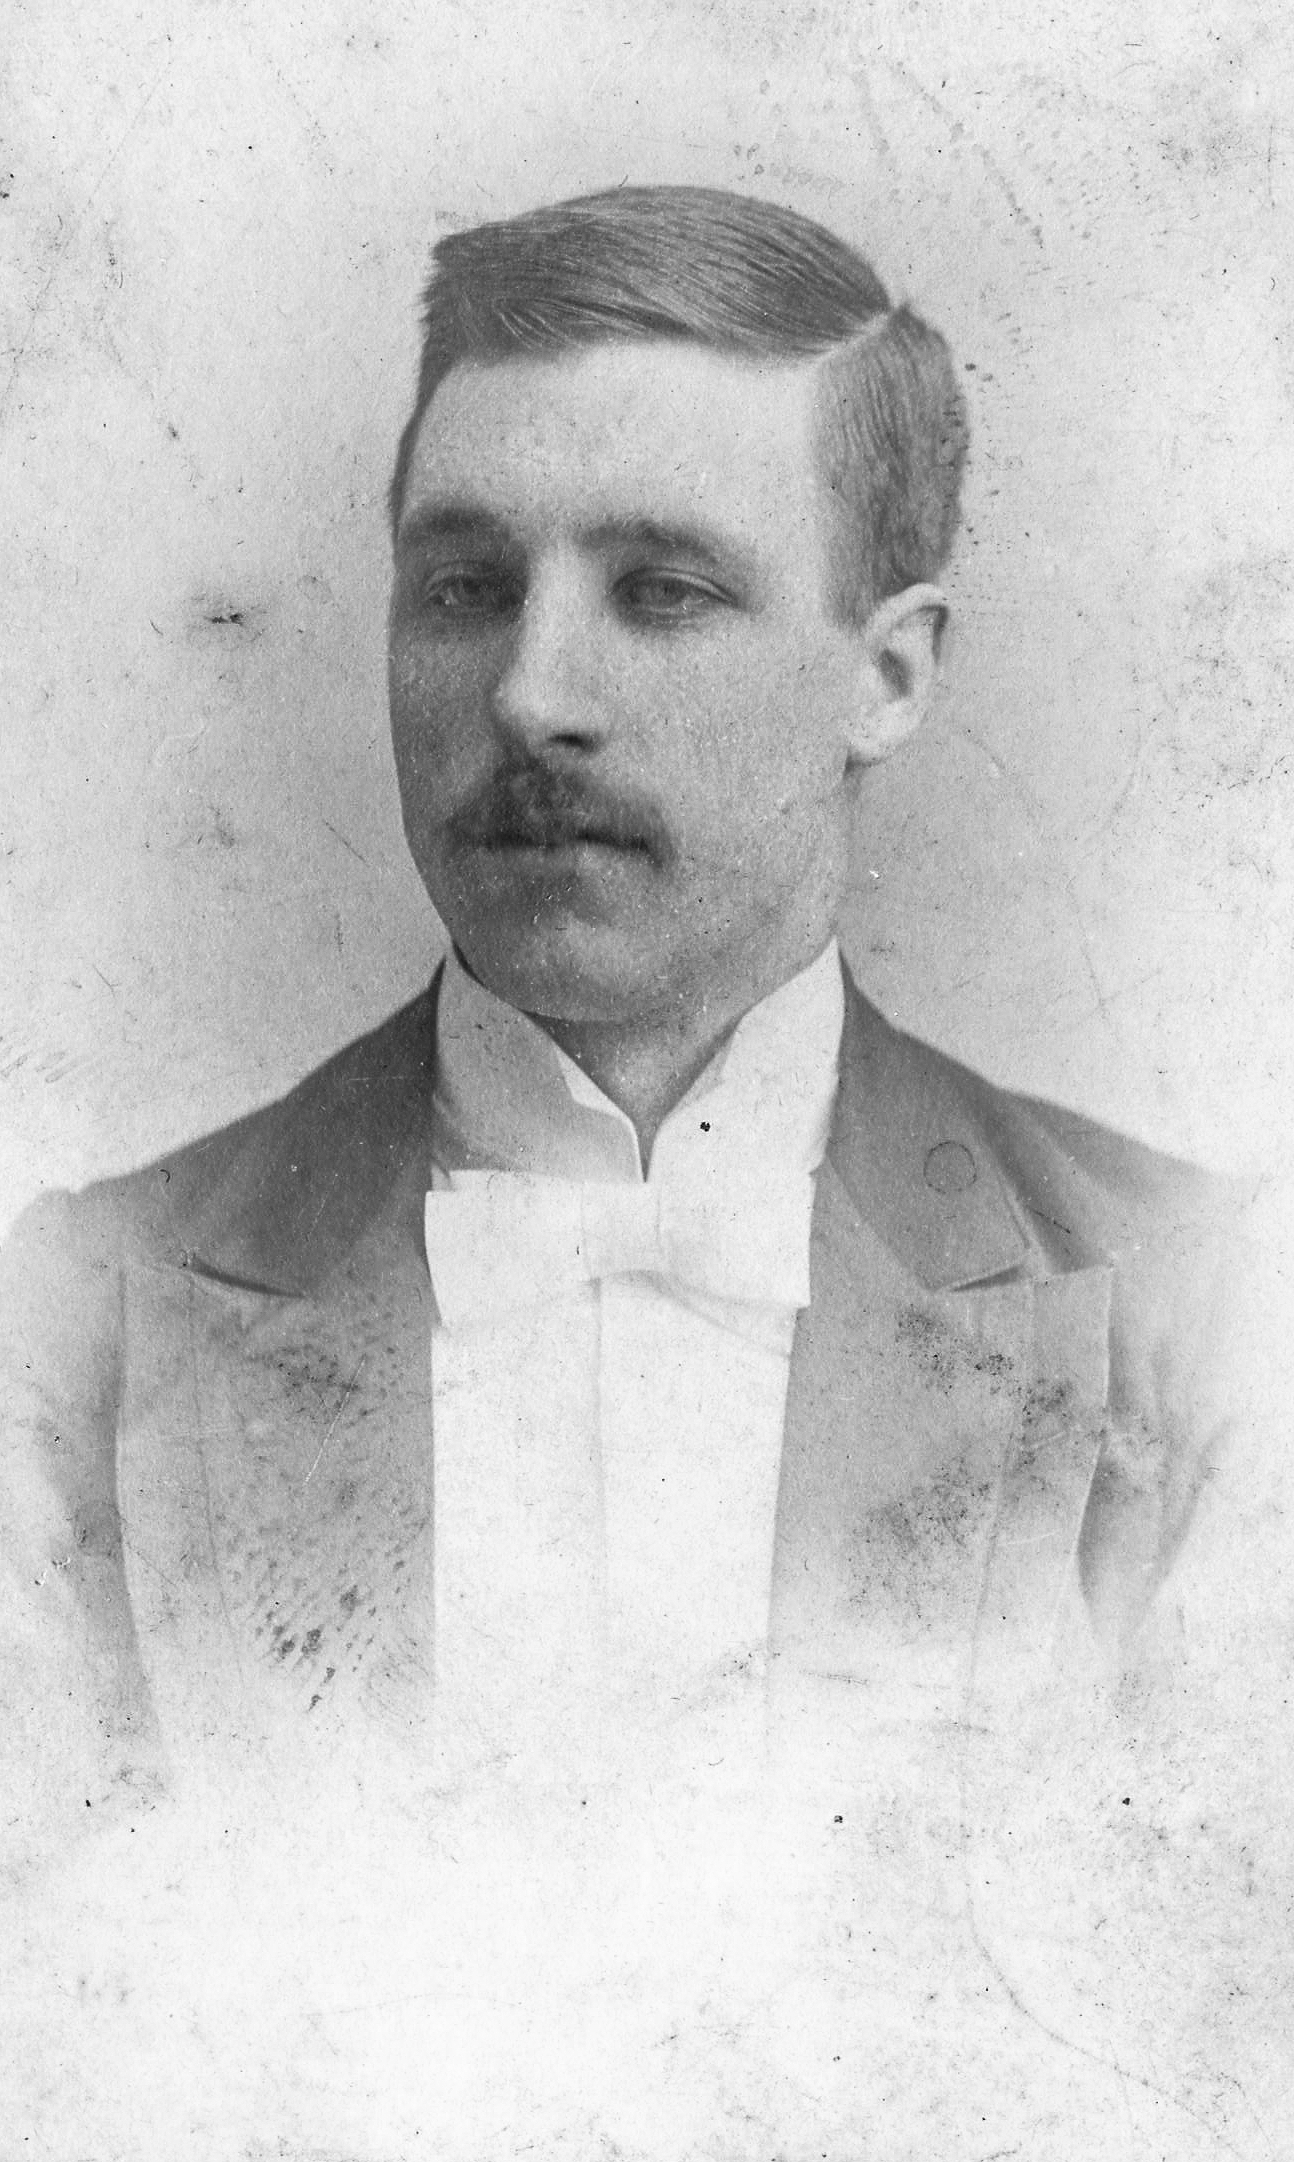 Black and white archival photograph of a man wearing suit, and bowtie.